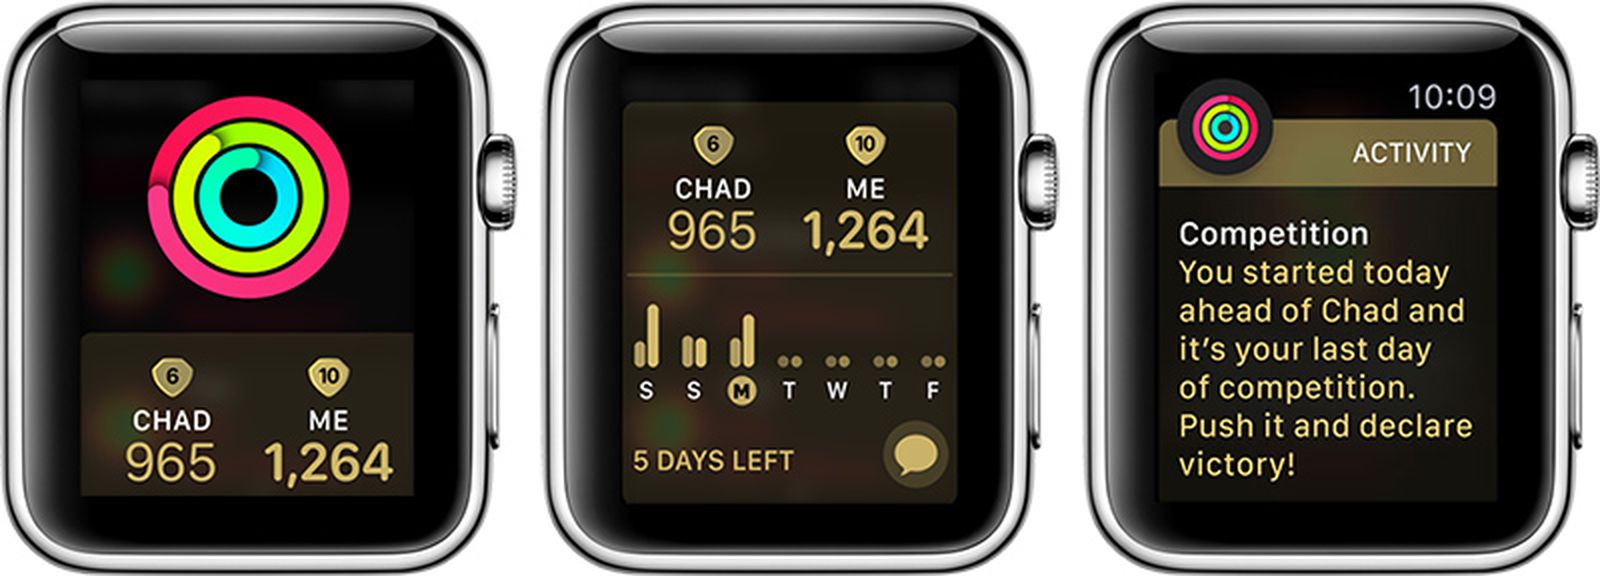 How to Start an Activity Competition With a Friend in watchOS 5 - MacRumors